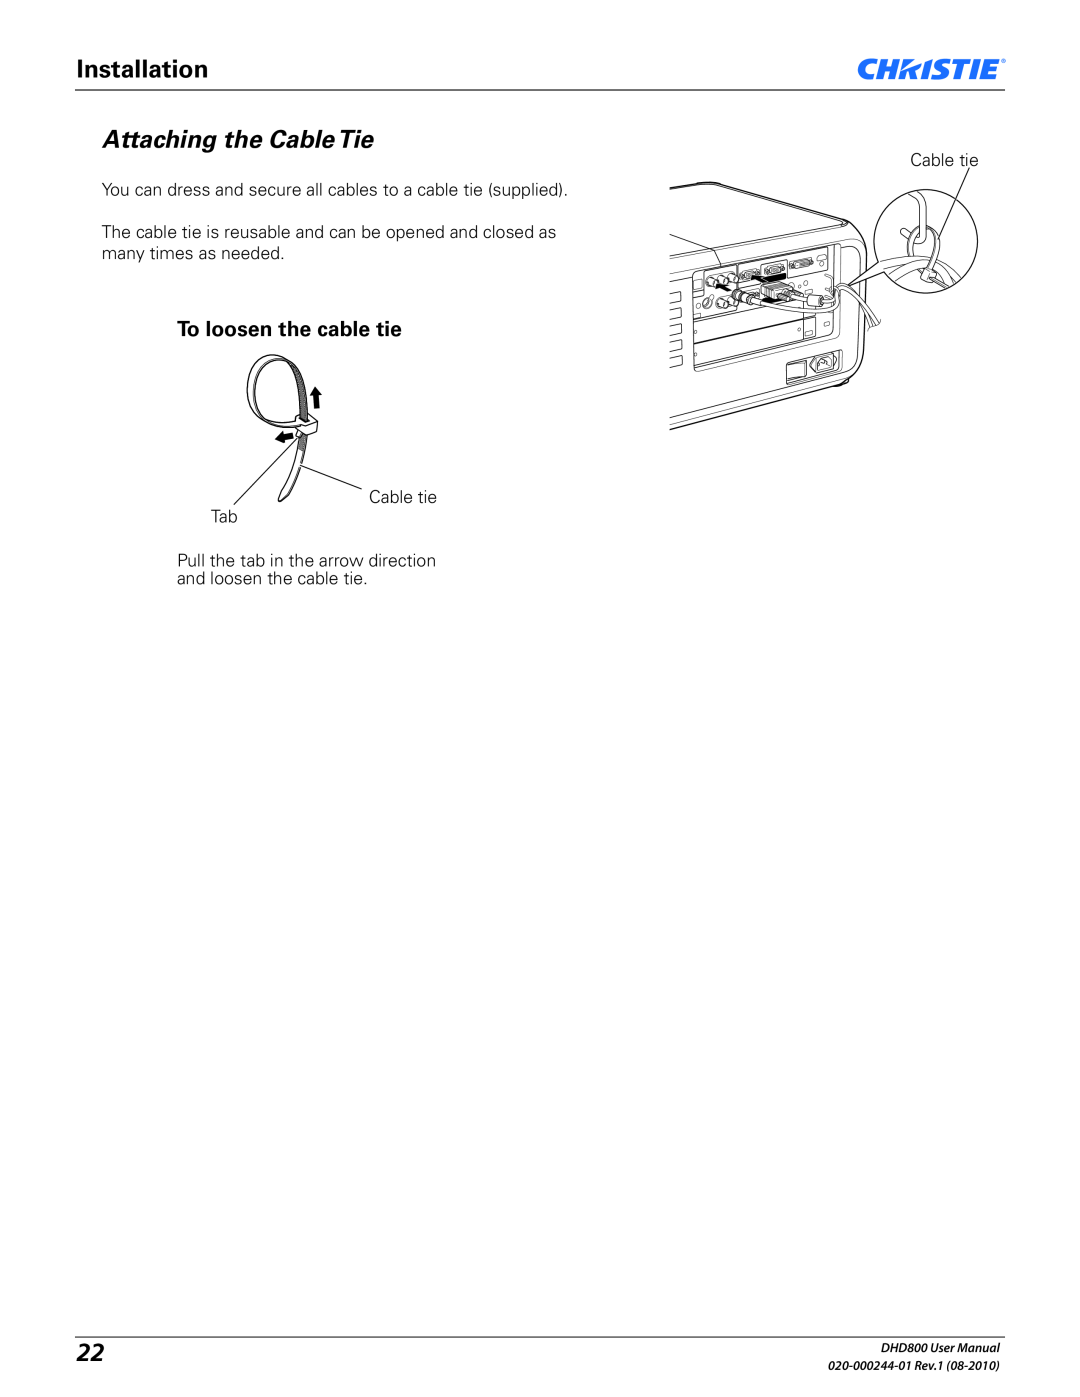 Christie Digital Systems user manual Attaching the Cable Tie, Installation, To loosen the cable tie, DHD800 User Manual 